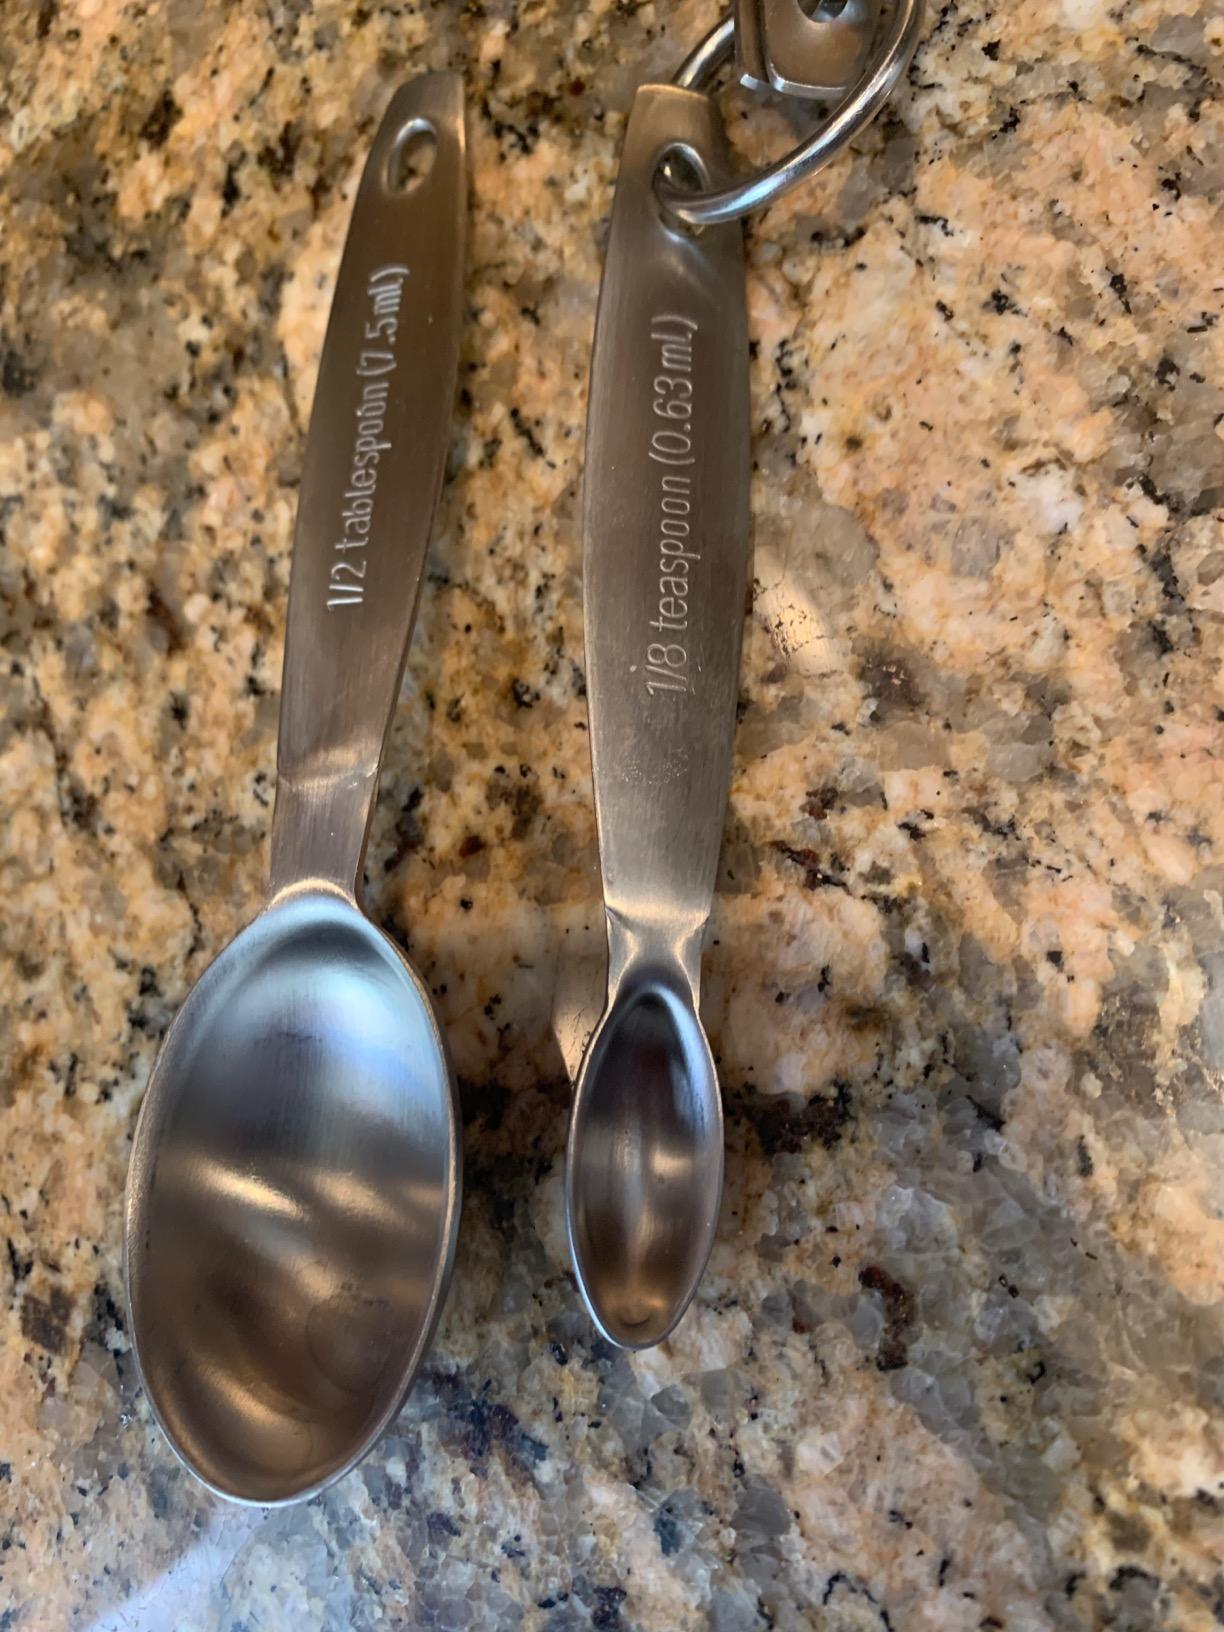 Spring Chef - Oval Stainless Steel Metal Measuring Spoons Set, Easy to Read  Dual Measurements for Dry and Liquid Ingredients, Medicine and More